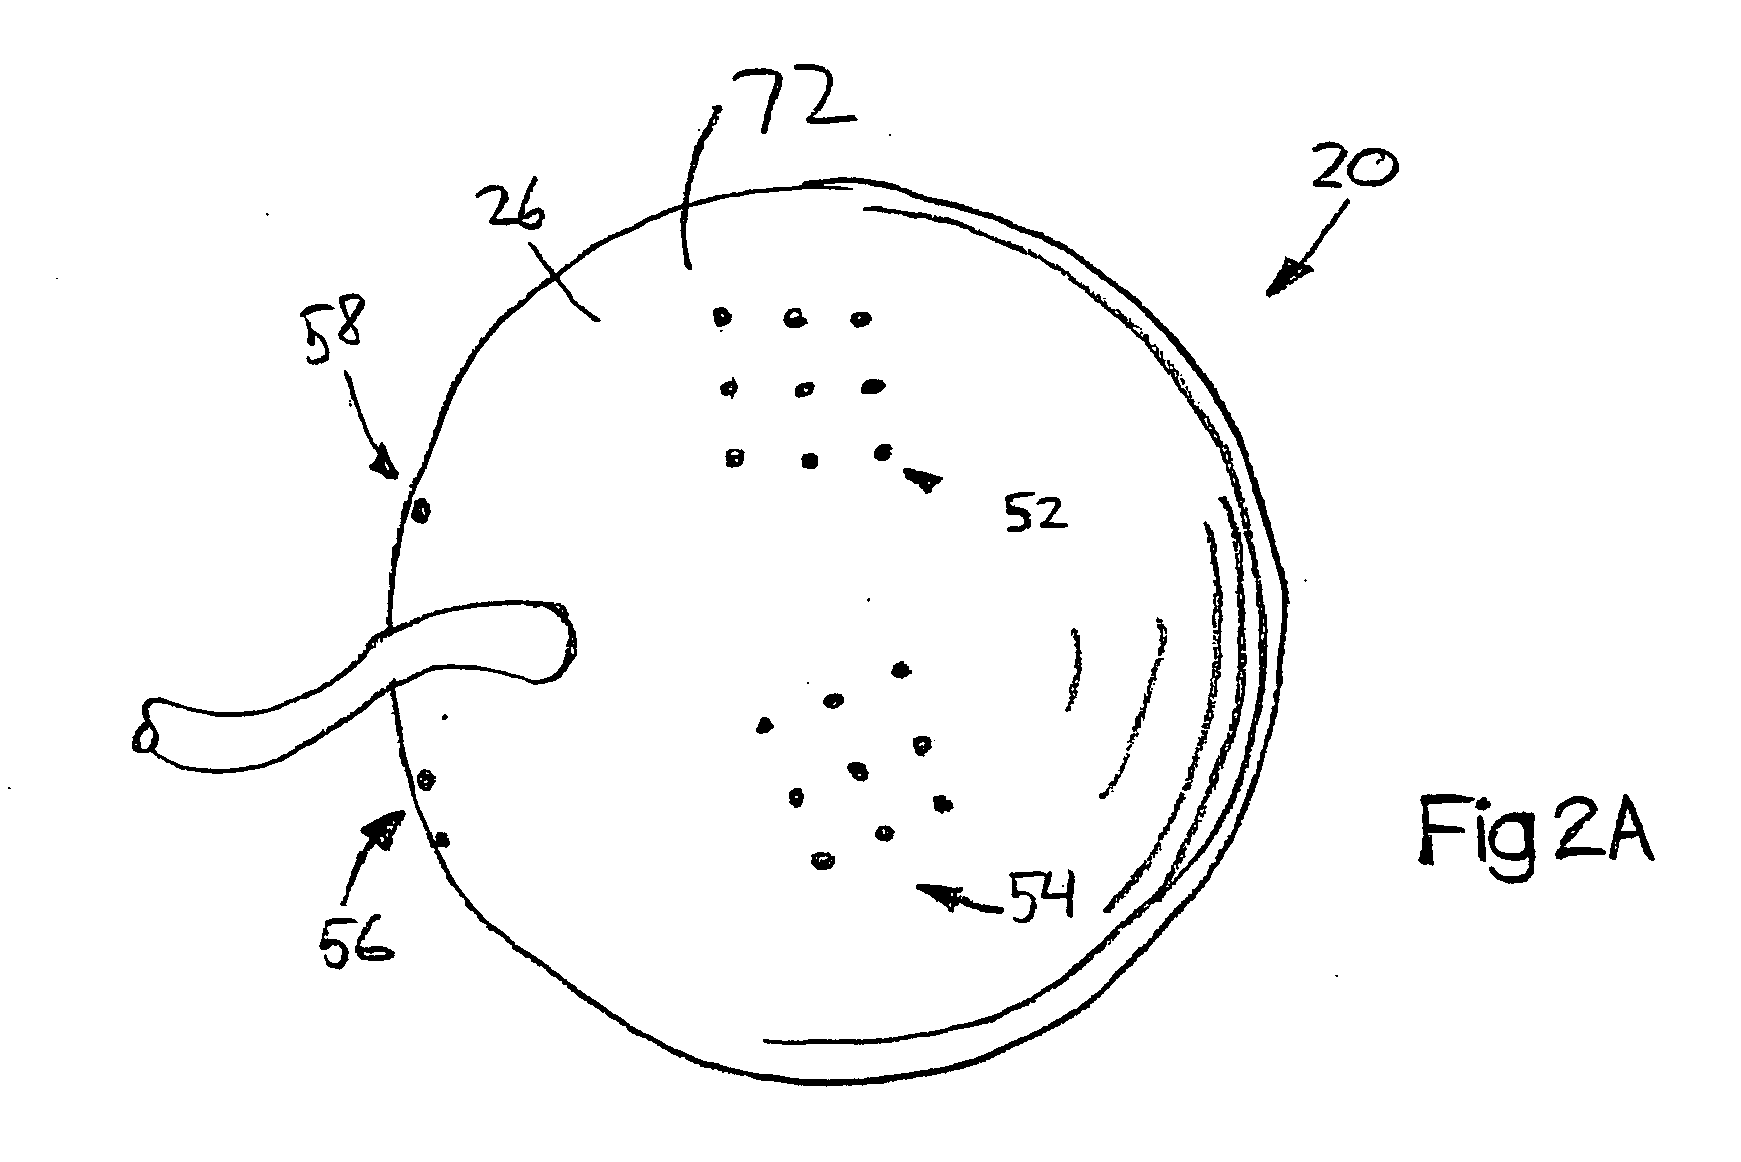 System and method for treating connective tissue